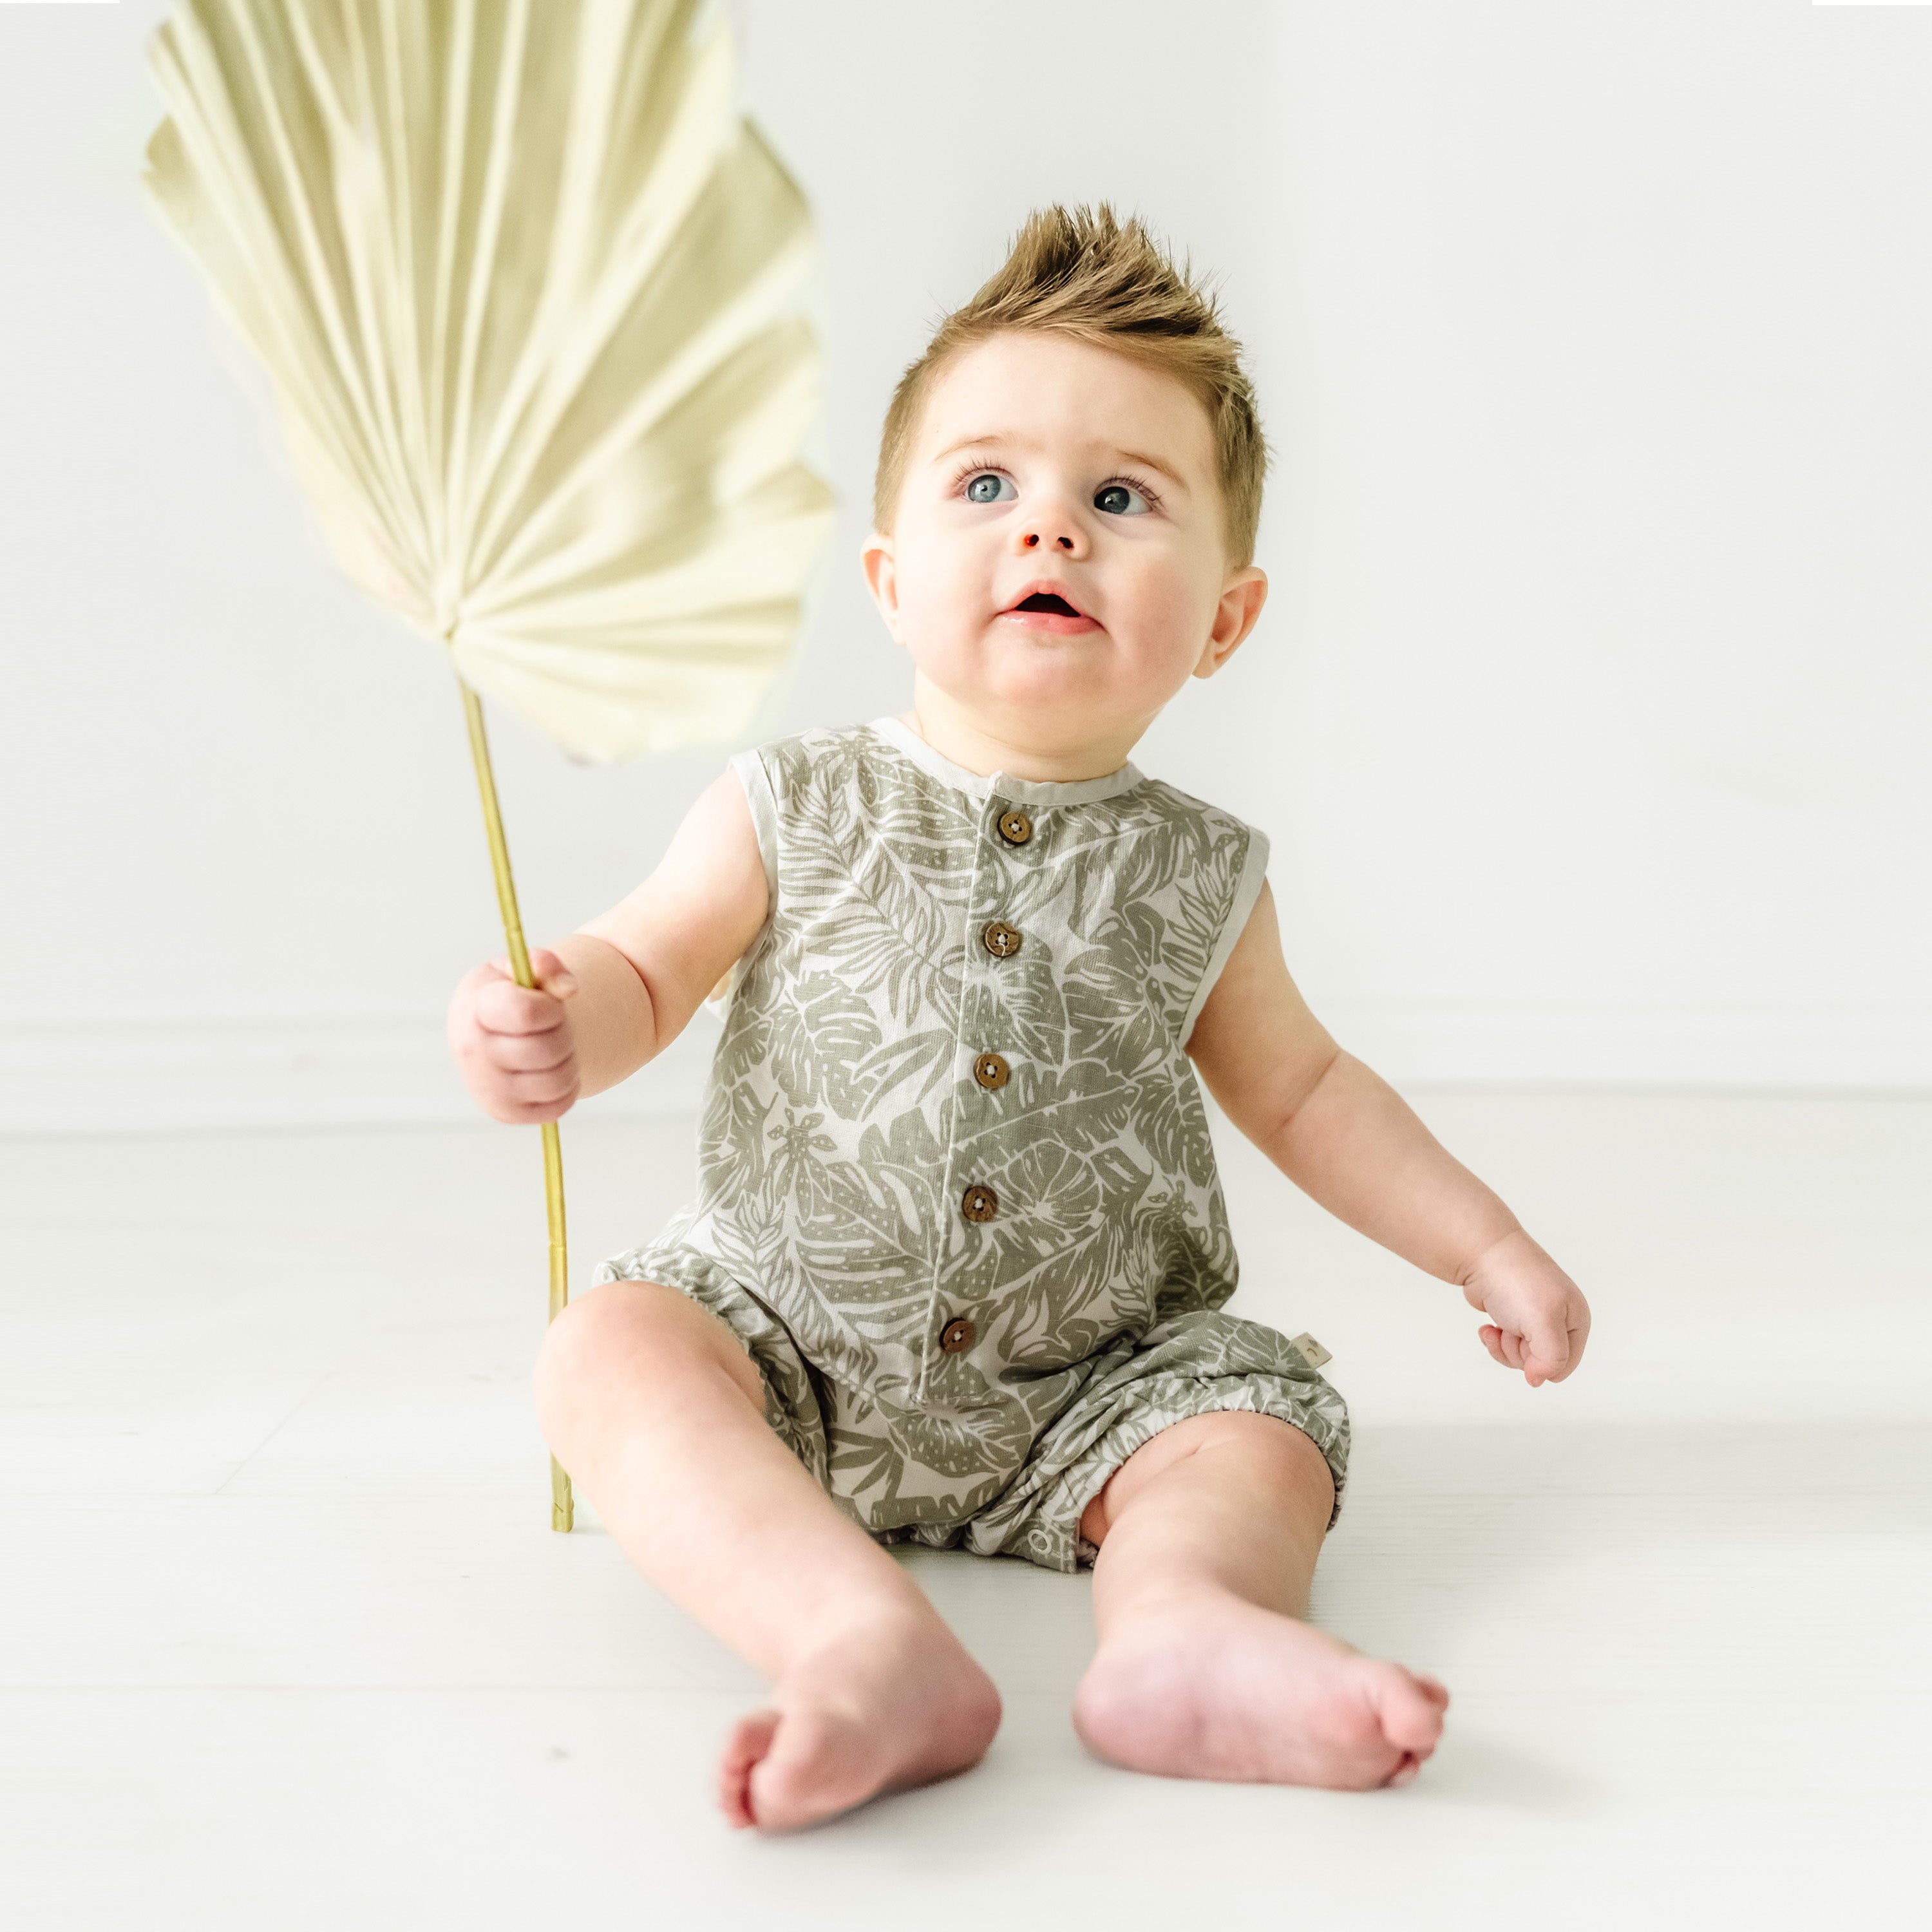 A toddler girl with a spiky hairstyle sits on a white floor, holding a golden leaf-shaped fan, wearing an Organic Linen Sleeveless Bubble Romper with leaf patterns from Makemake Organics.